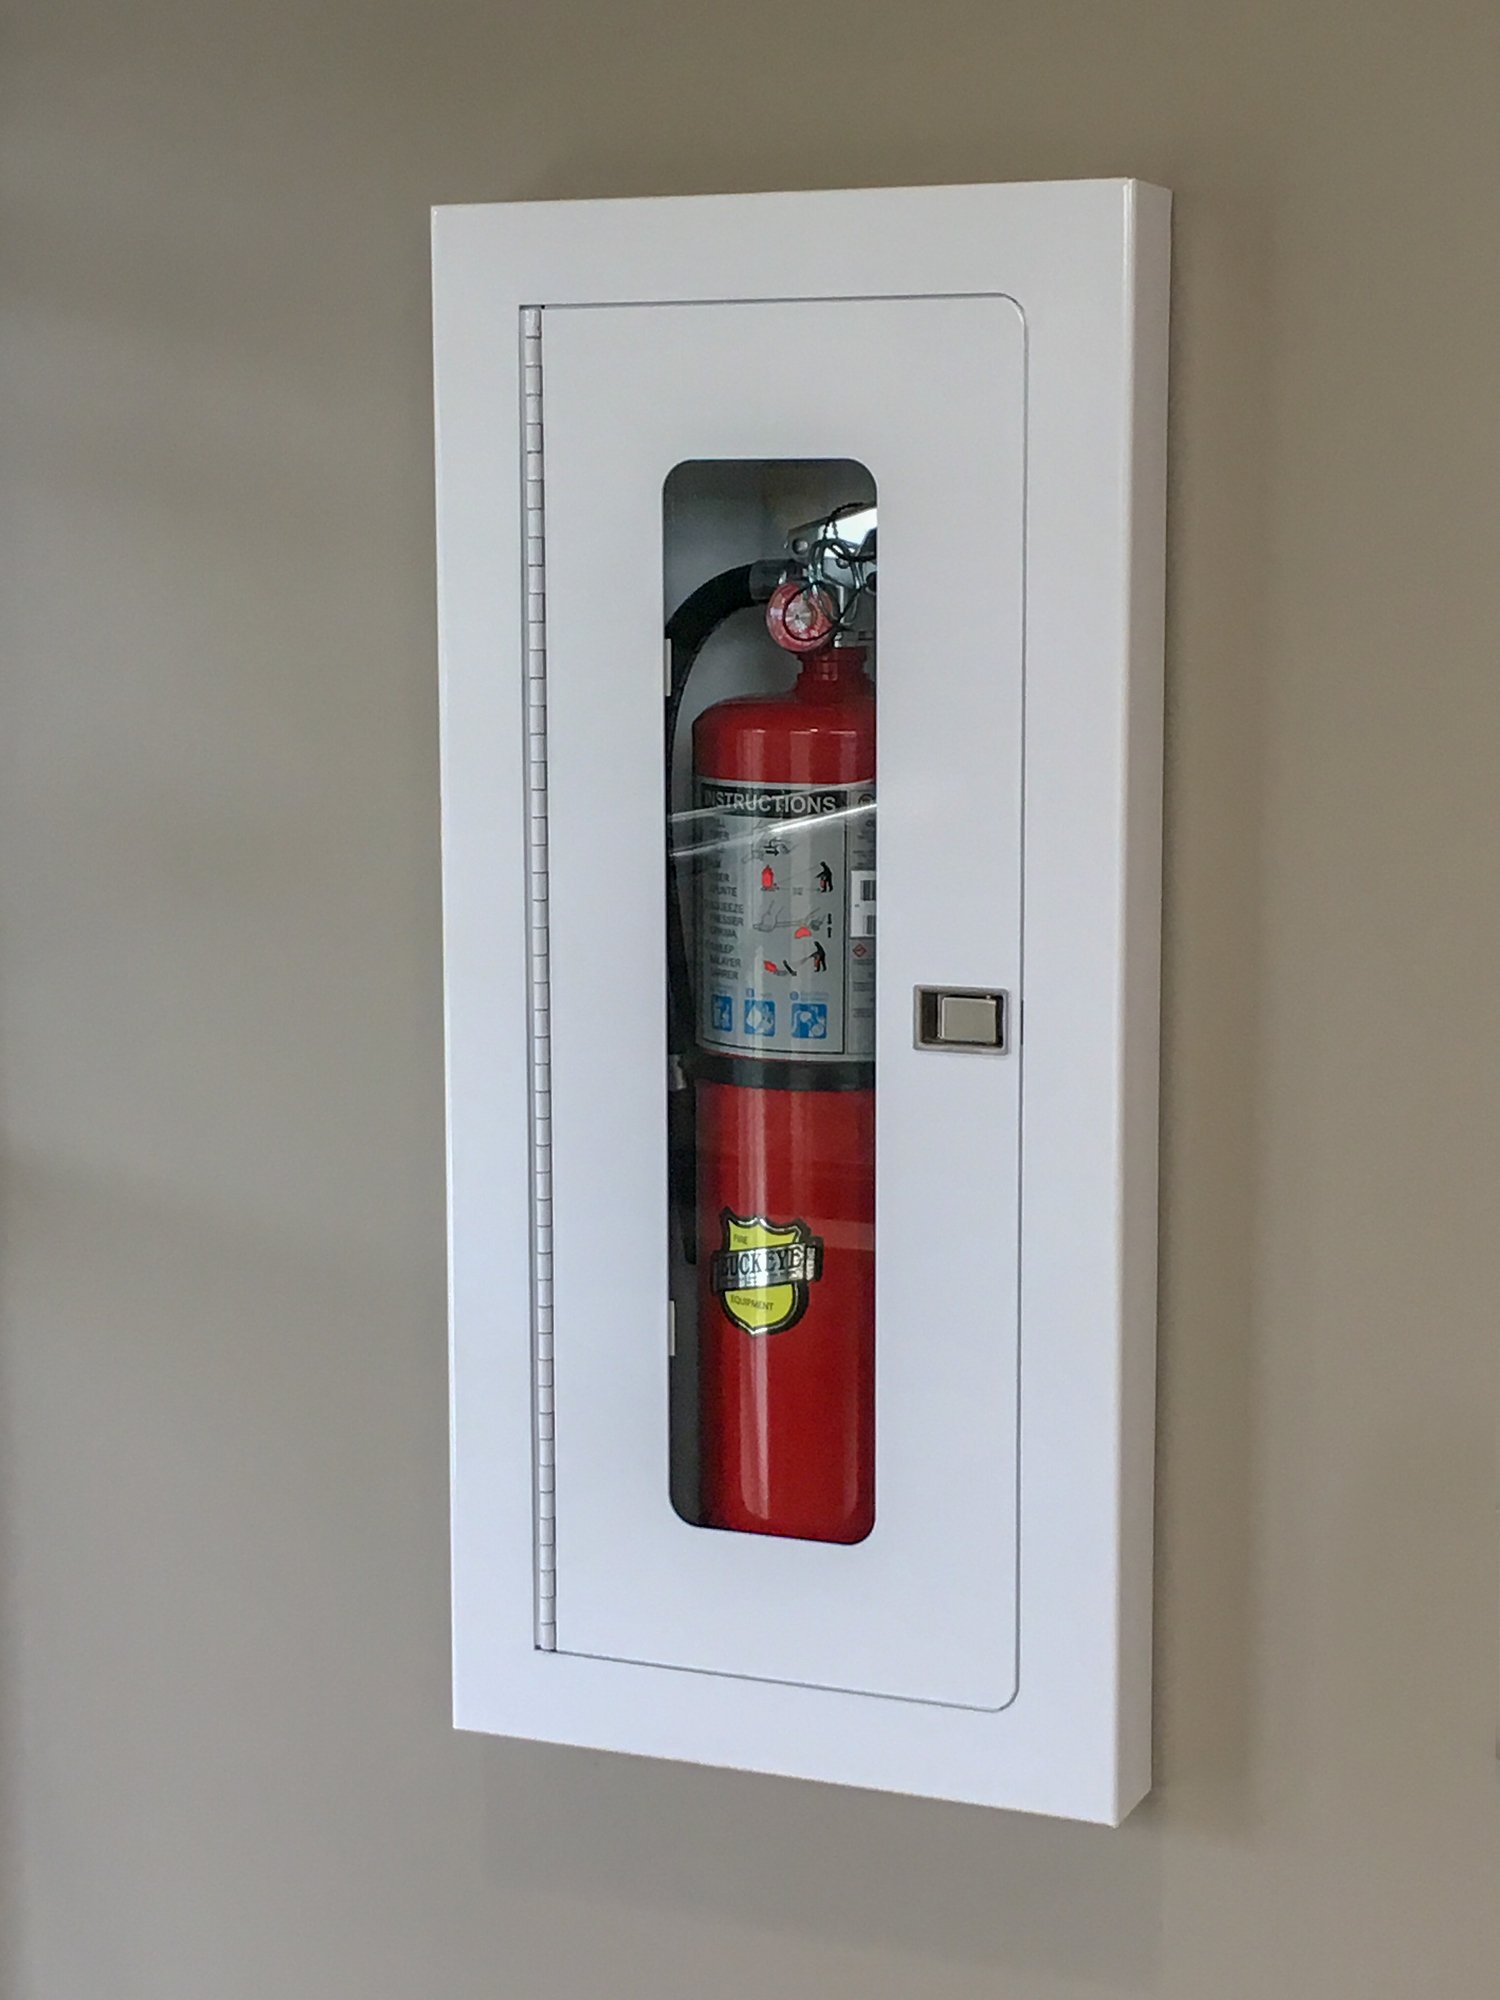 Where Should Fire Extinguishers Be